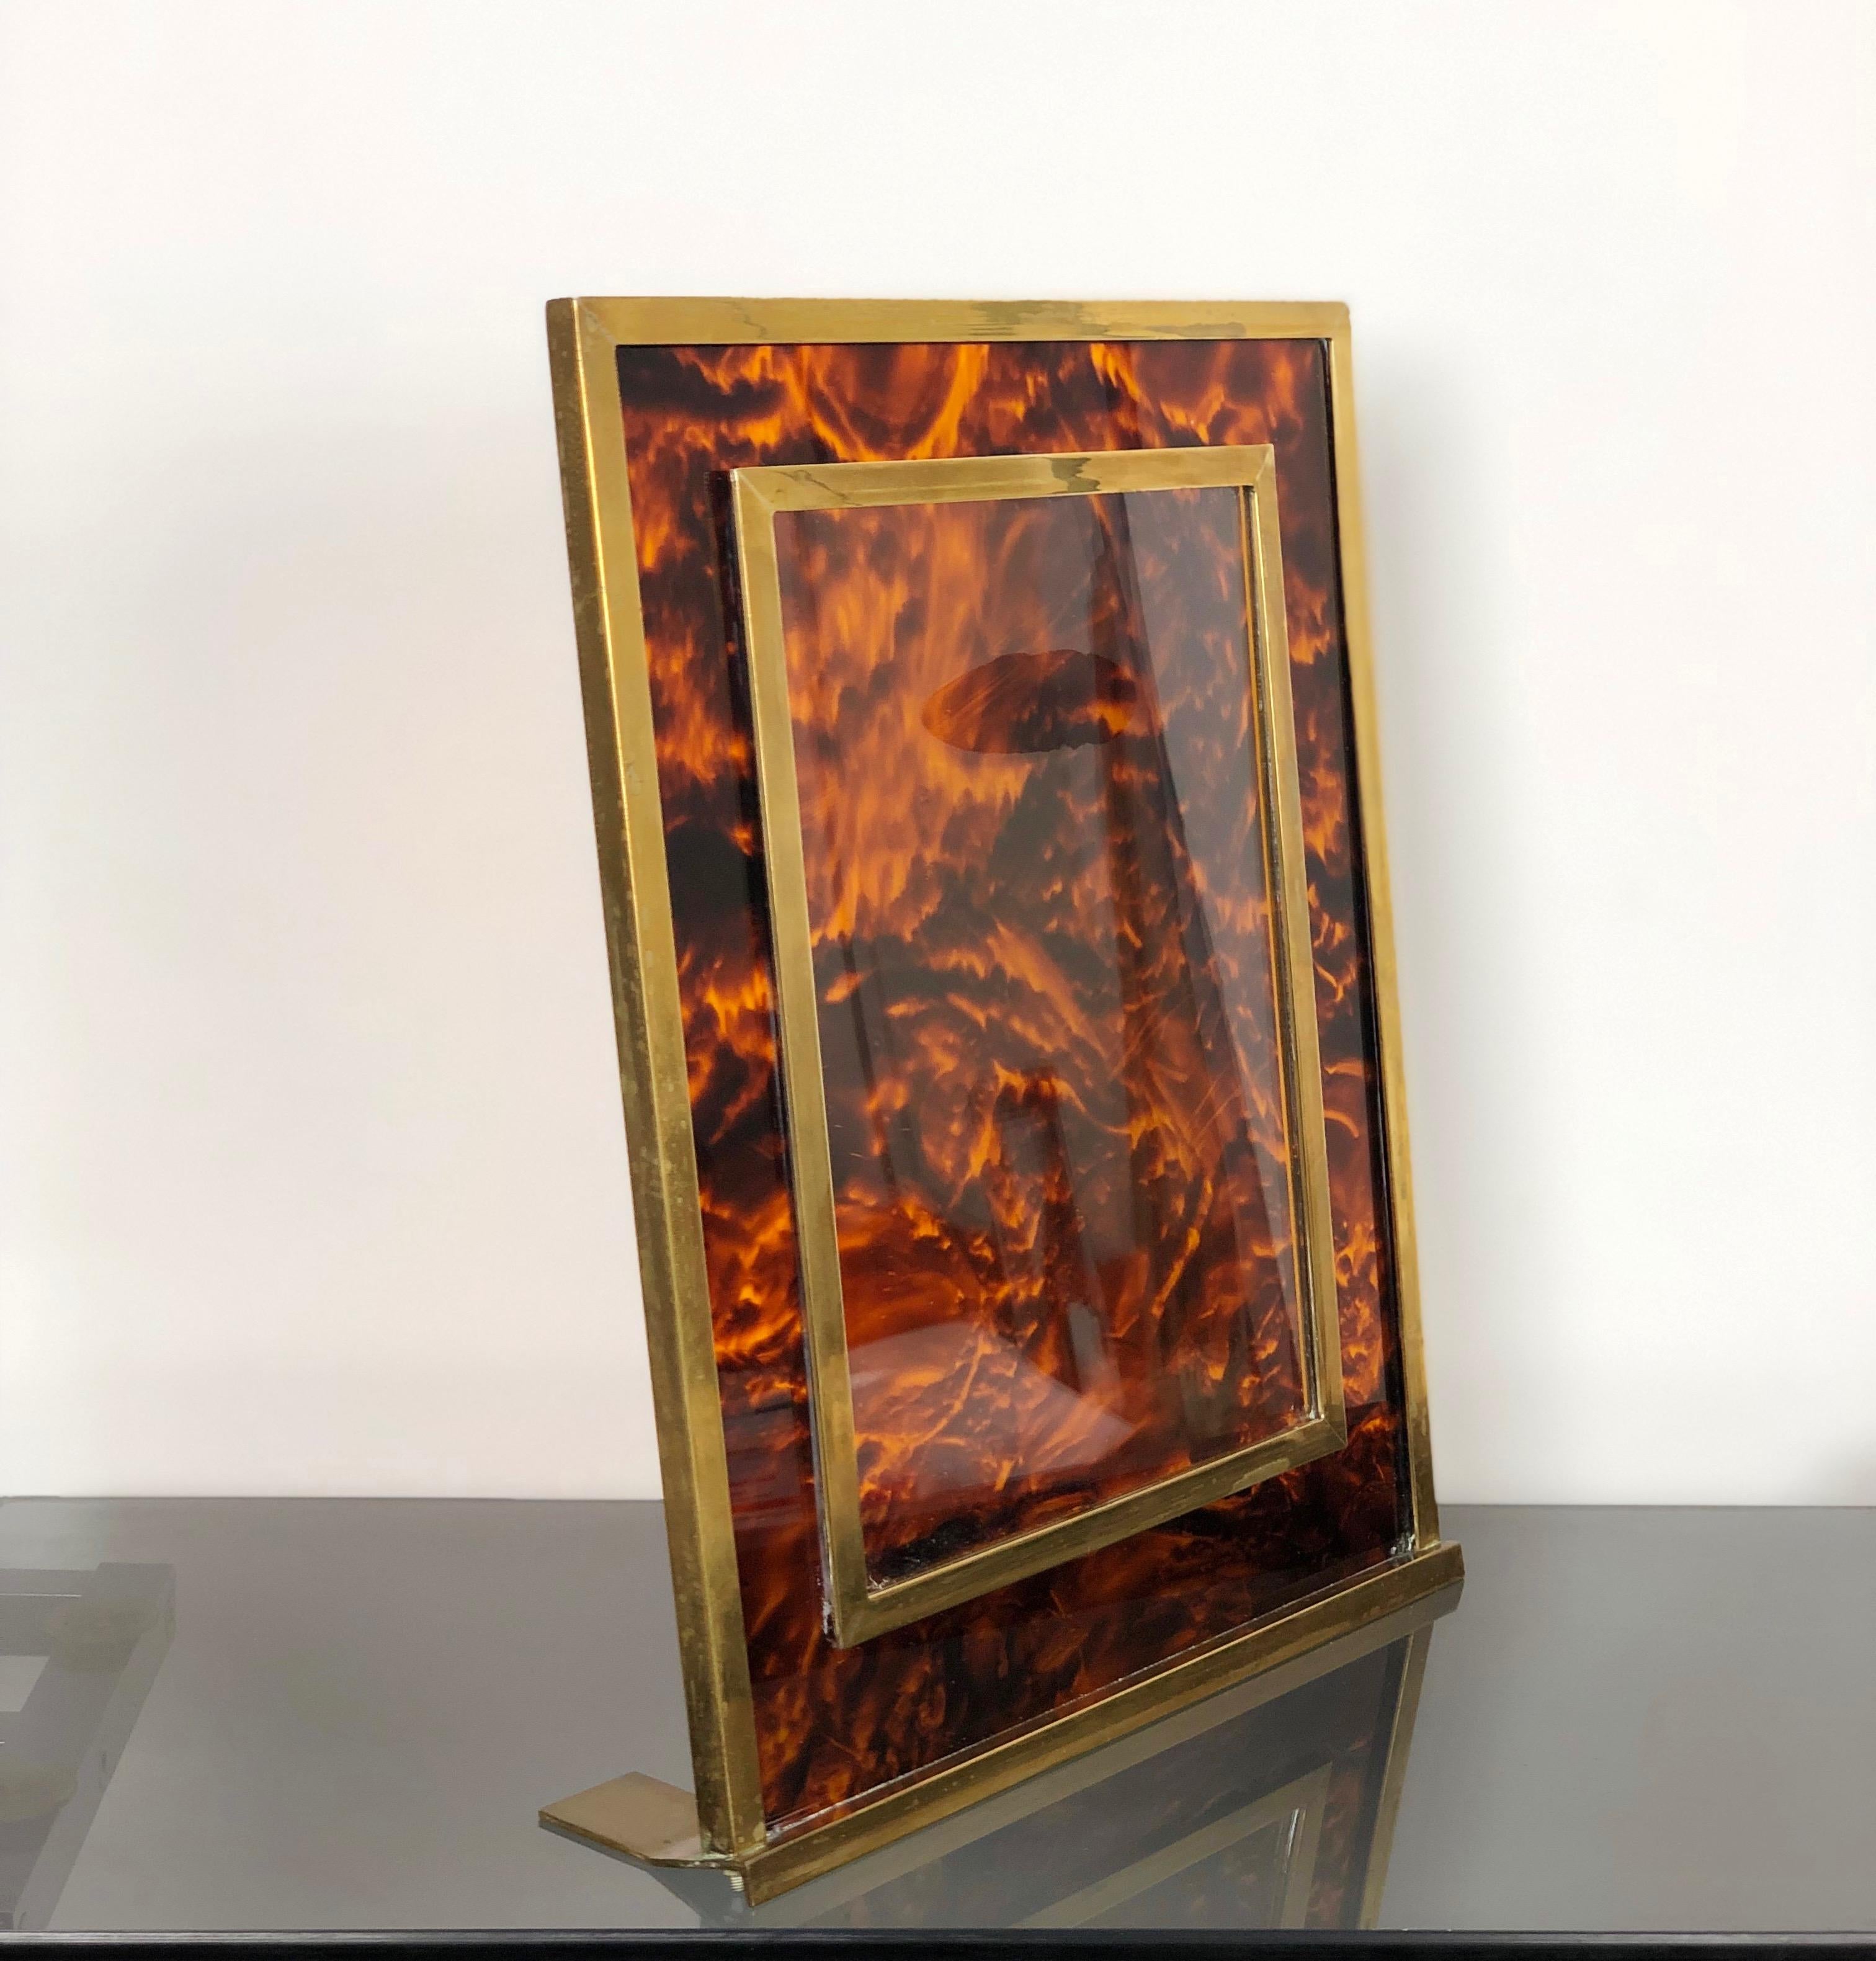 Picture frame in Christian Dior style made of Lucite in a tortoiseshell pattern and brass, France, circa 1970. Conditions are very good and shown in the photos.